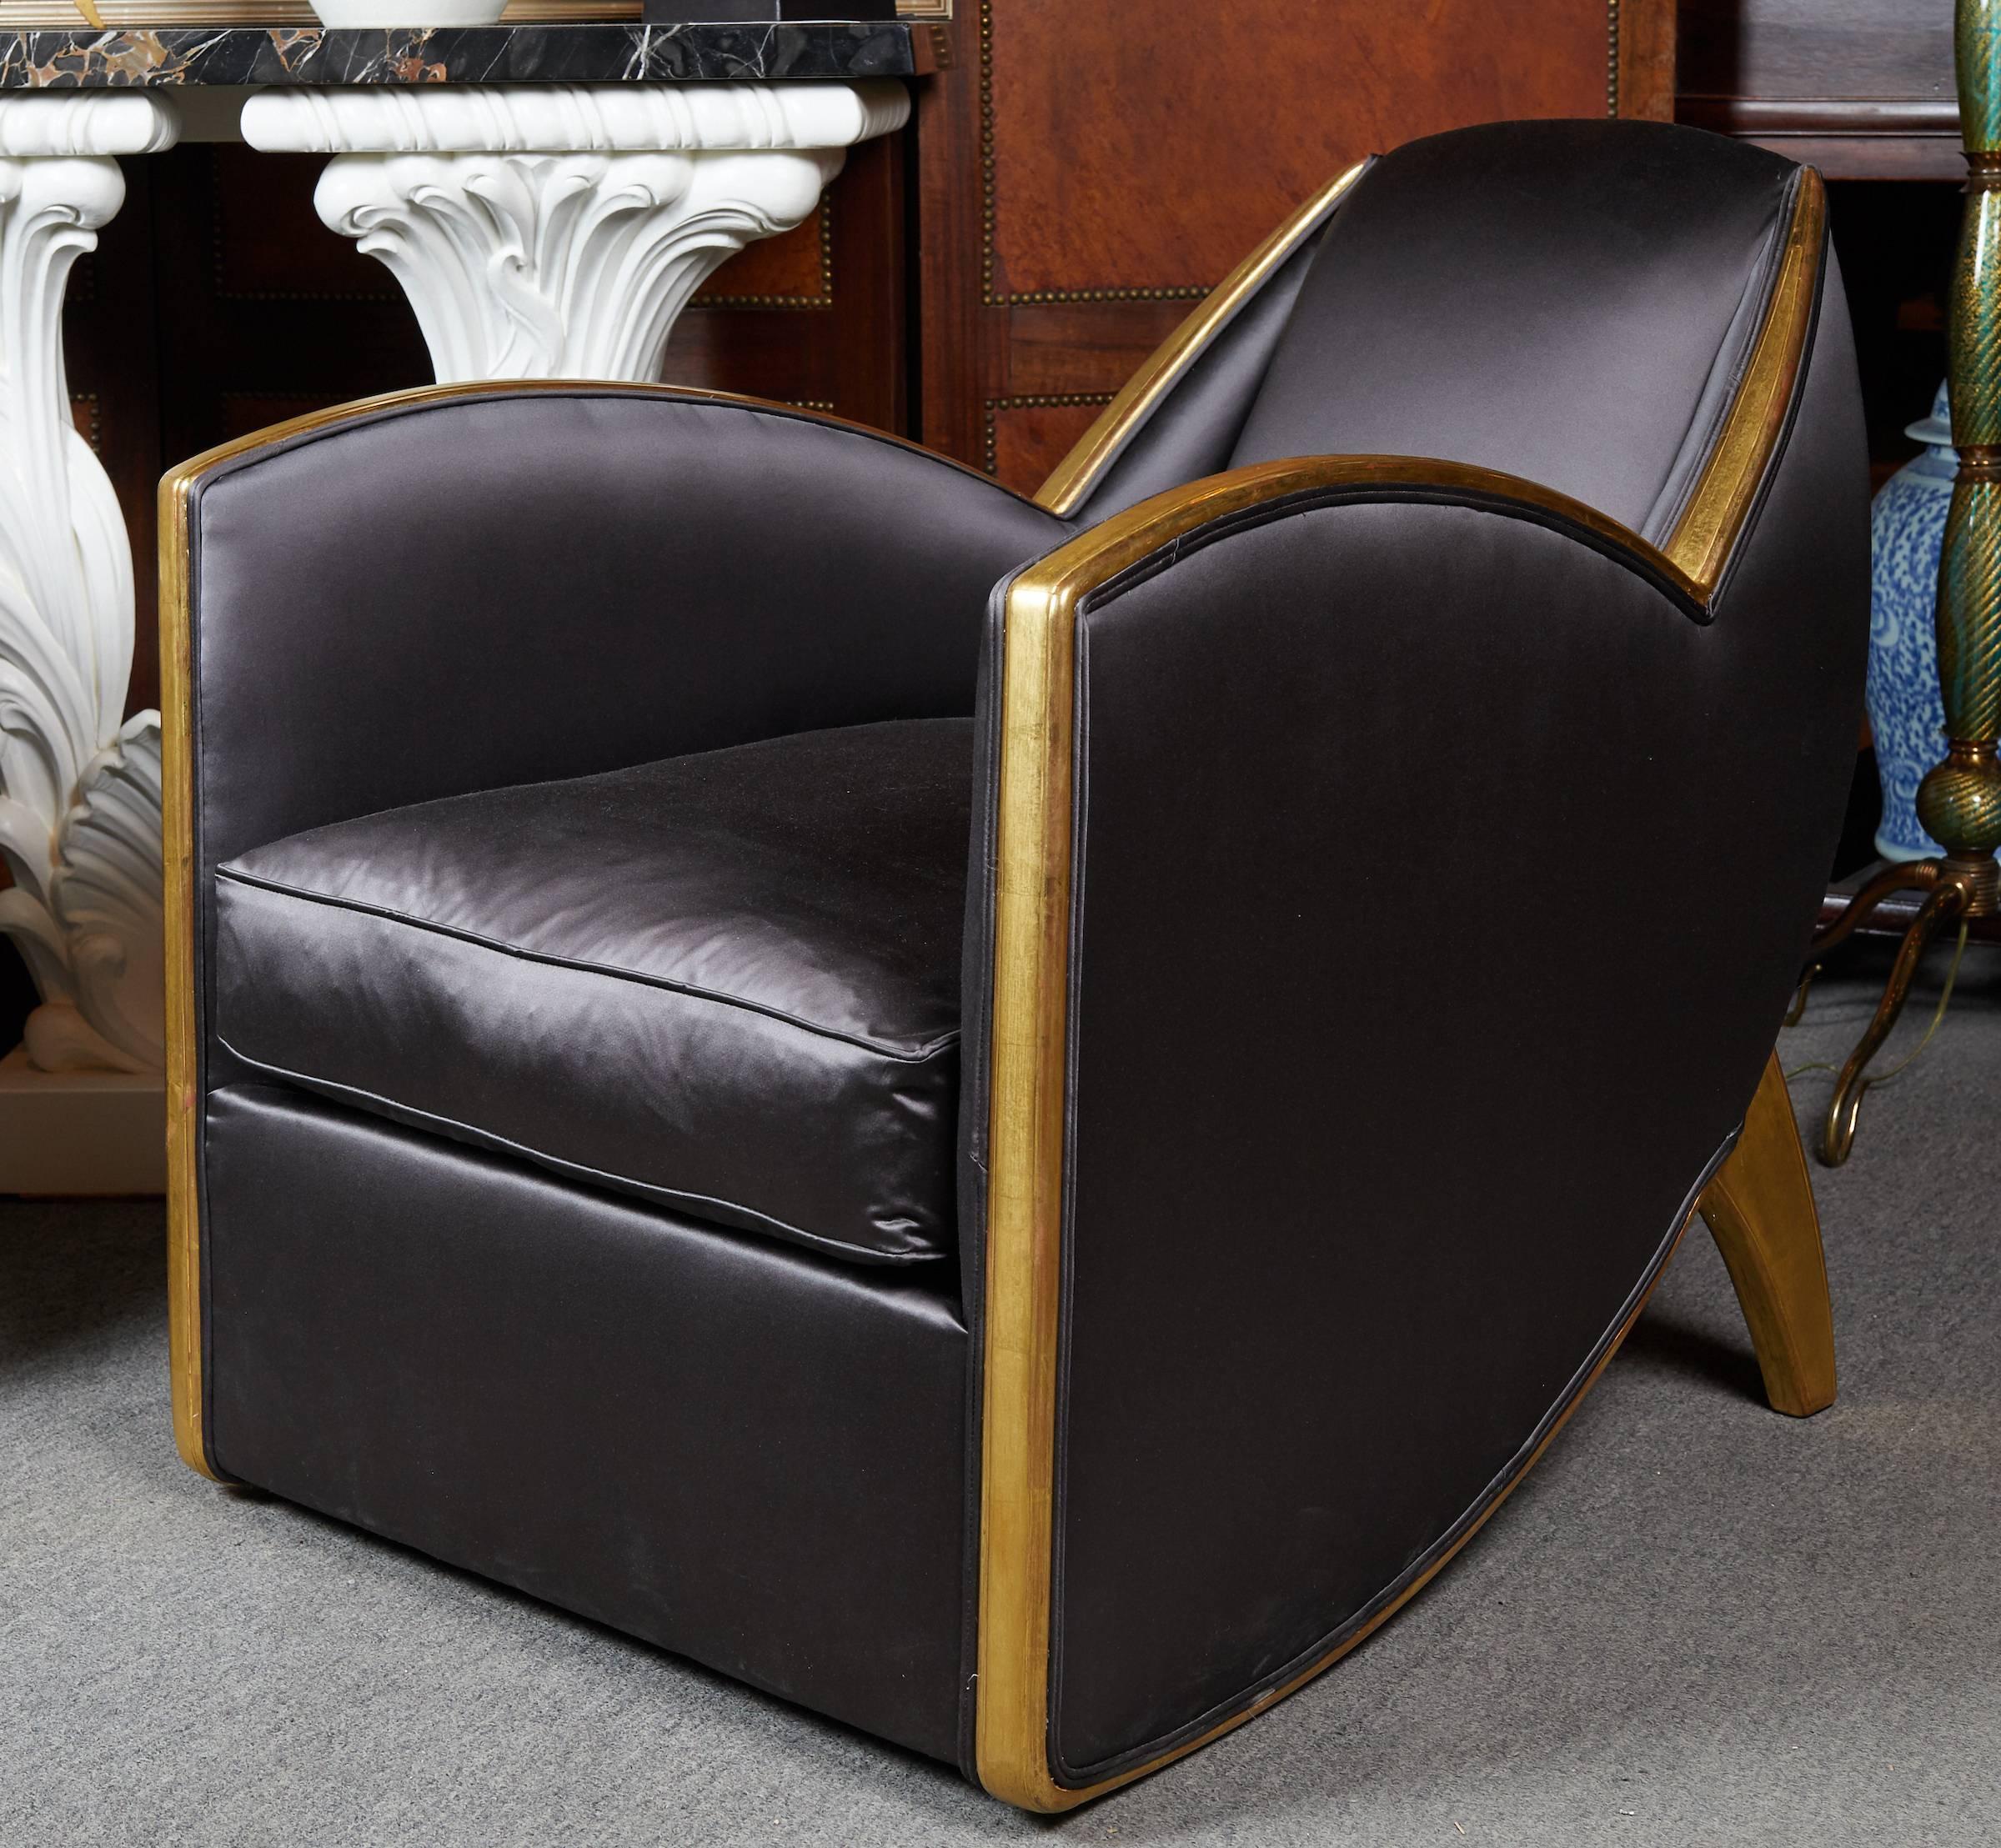 Extremely fine and stylish pair of French Art Deco style gilt wood  armchairs  upholstered in a dark grey satin fabric by Decoration Levitan.